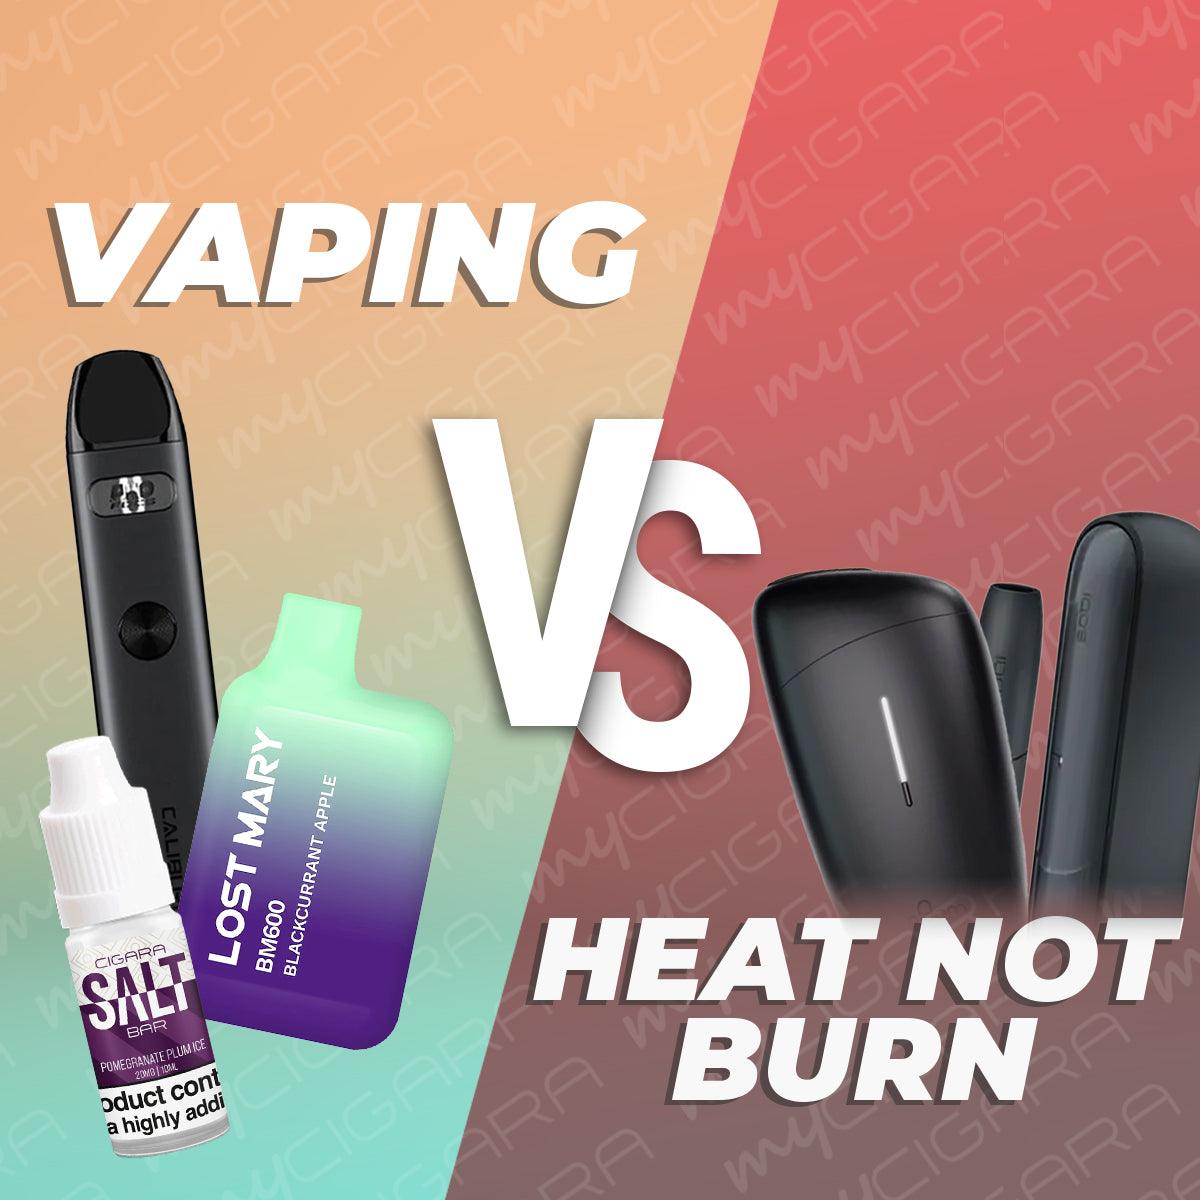 Vaping Vs Heat Not Burn: What’s The Difference?